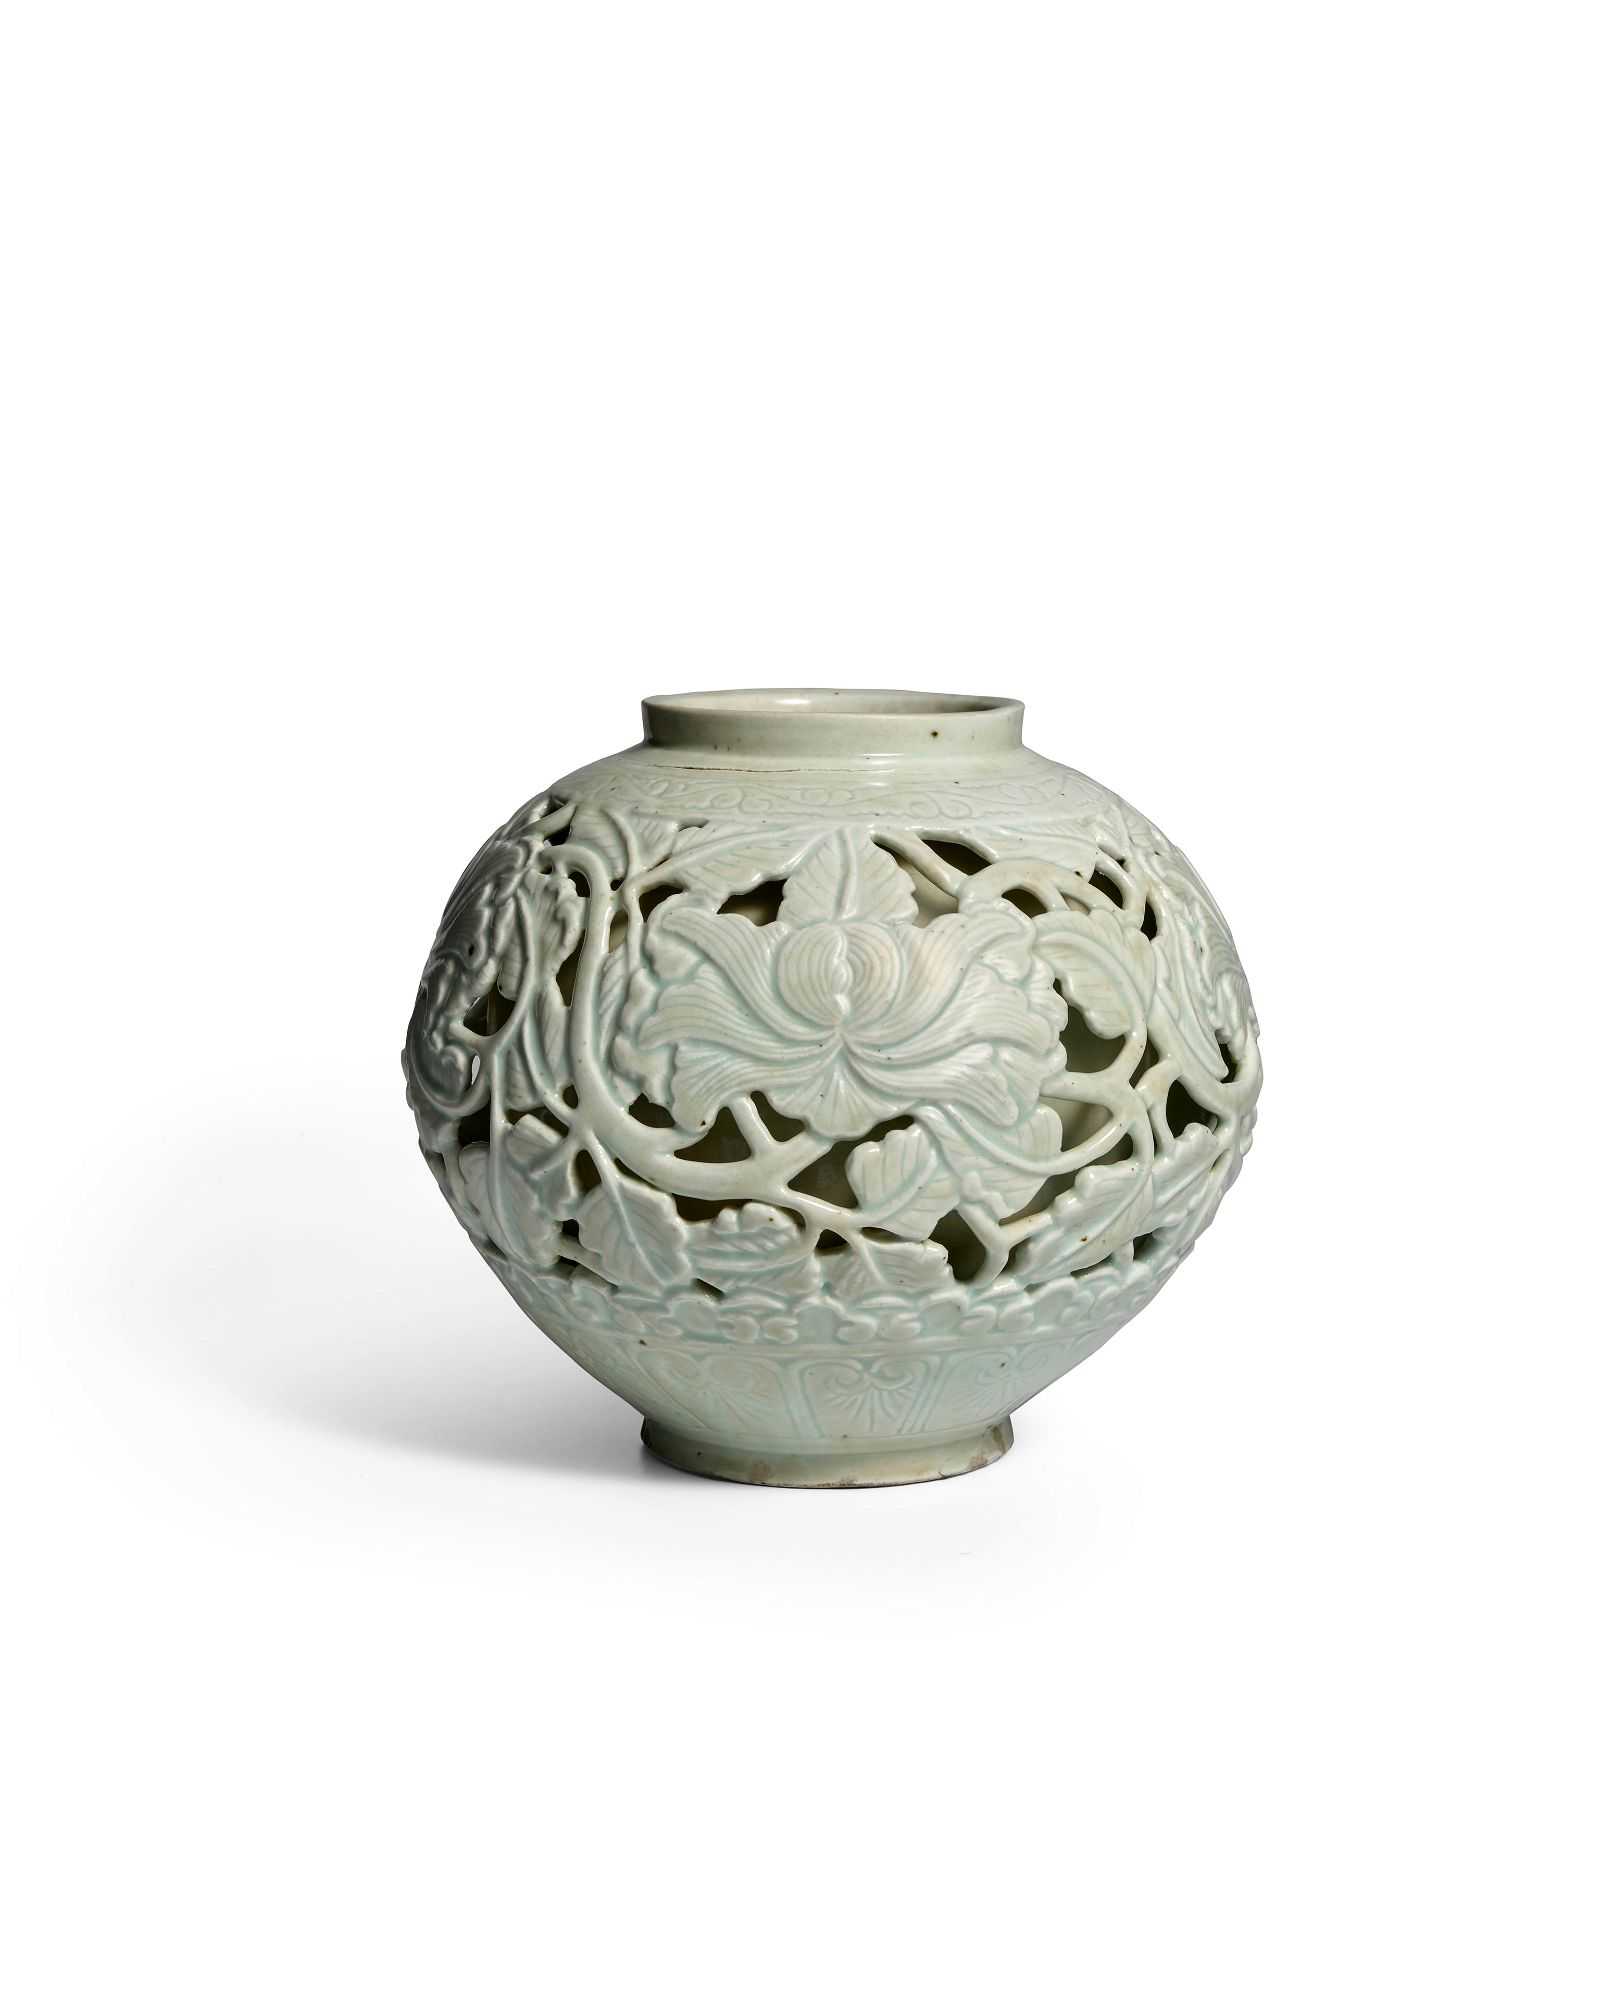 Joseon dynasty white porcelain reticulated jar, which hammered for $200,000 and sold for $256,000 with buyer’s premium at Bonhams’ sale of Fine Korean and Japanese Art on March 21.